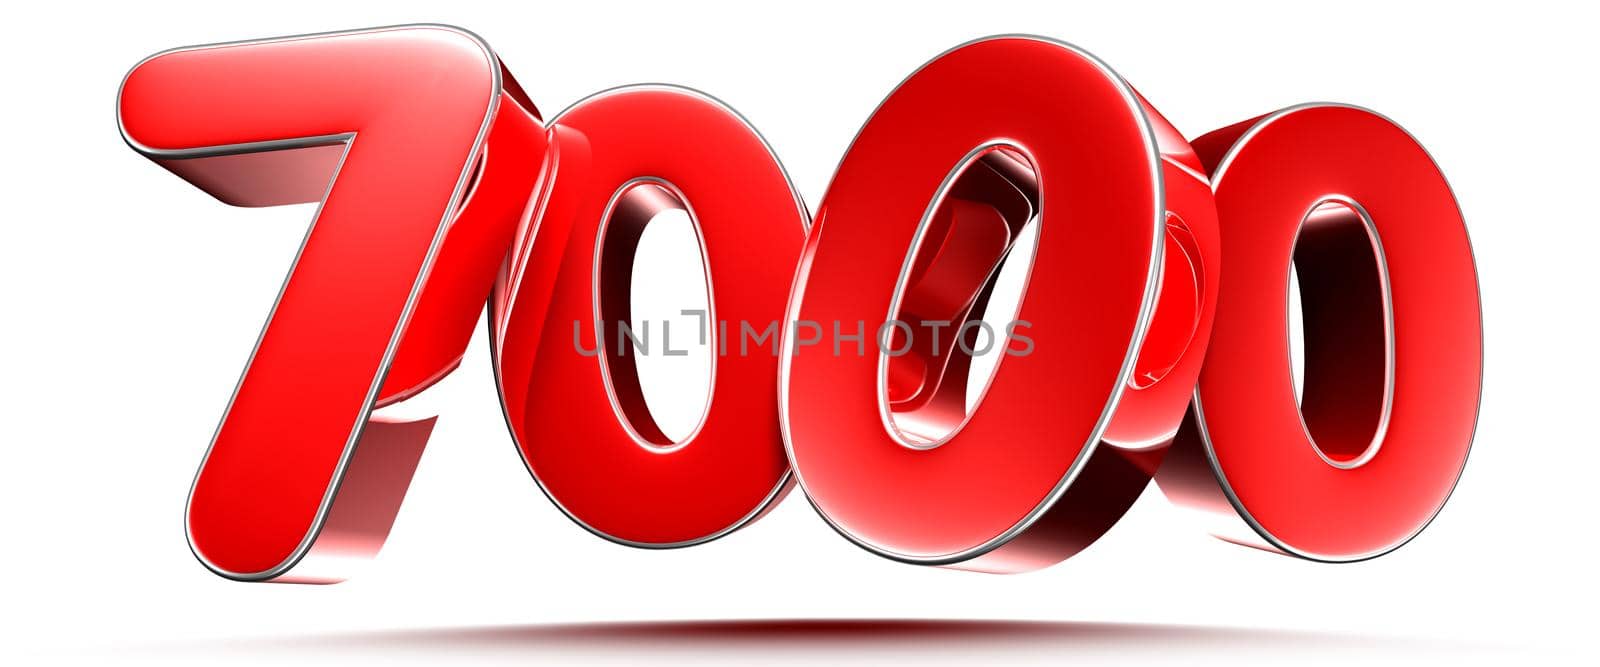 Rounded red numbers 7000 on white background 3D illustration with clipping path by thitimontoyai